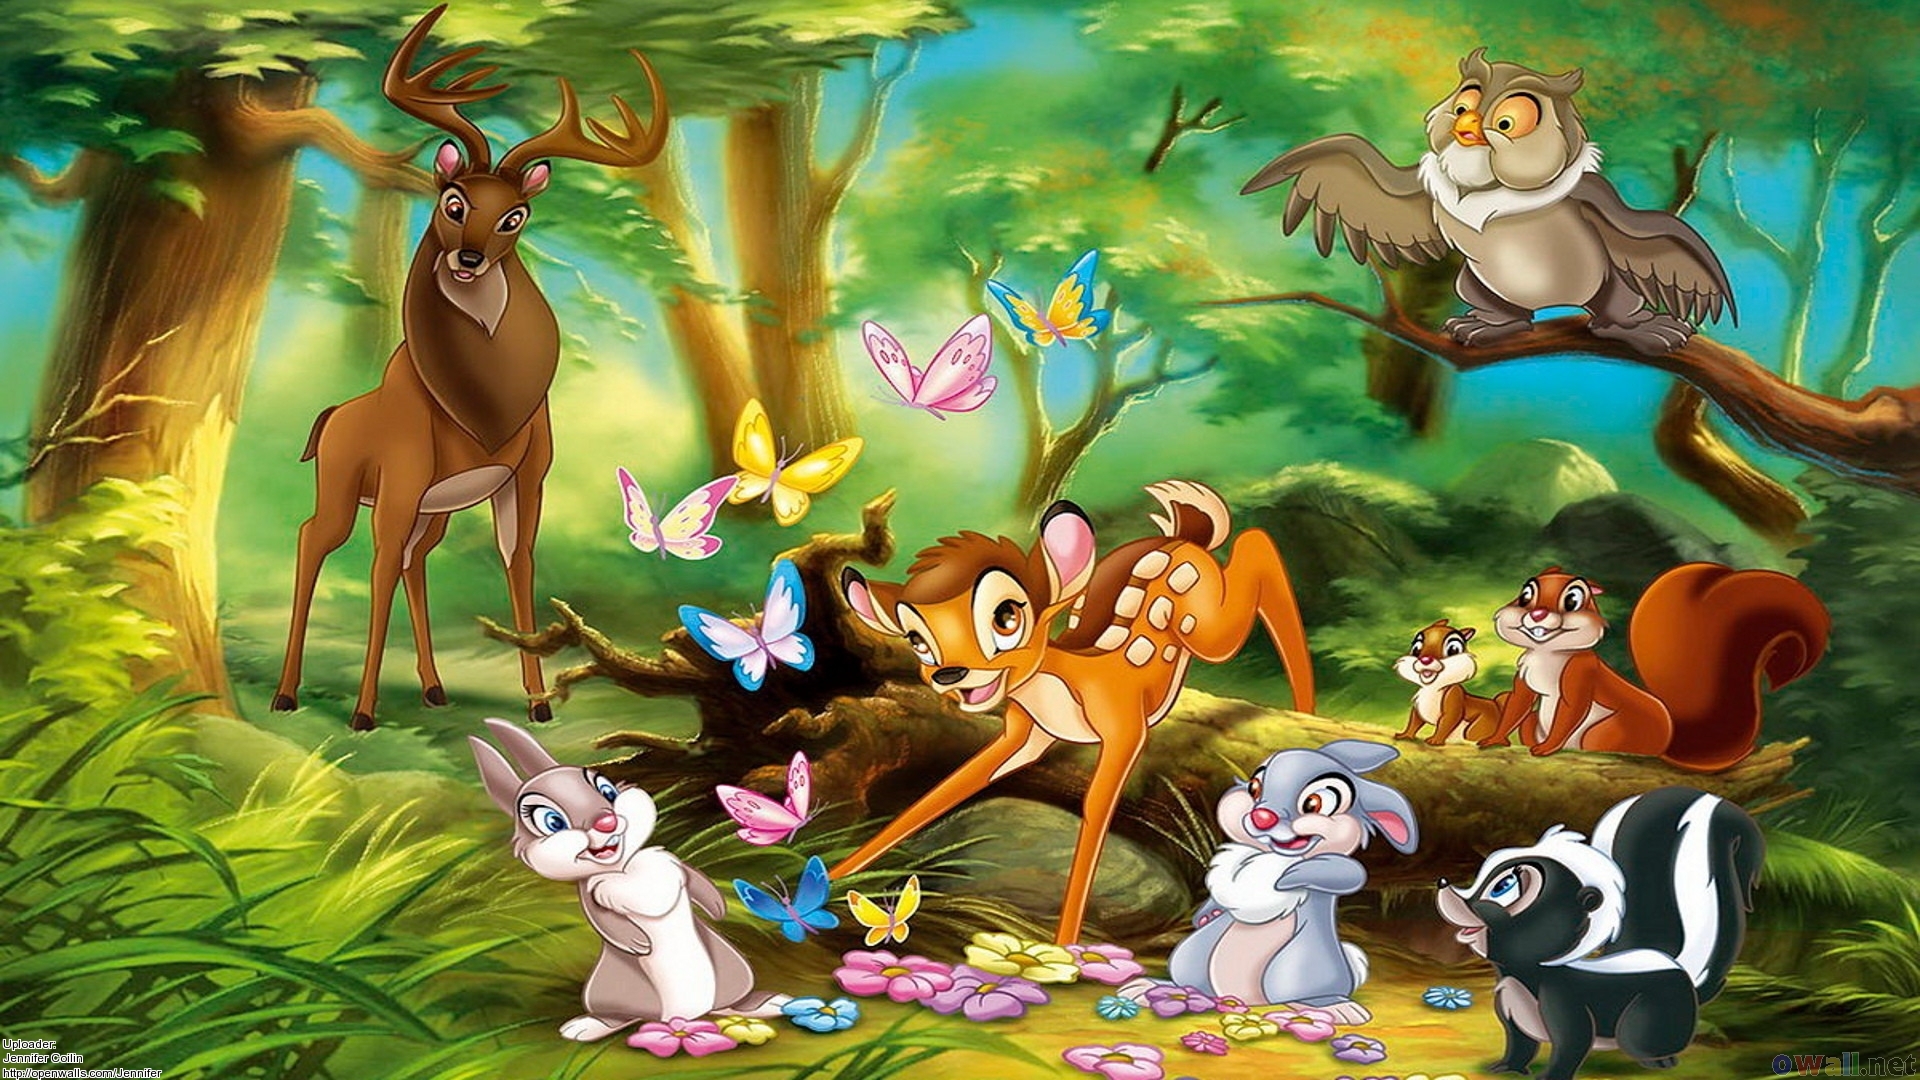 Animation Wallpapers - Bambi And Friends - 1920x1080 Wallpaper 